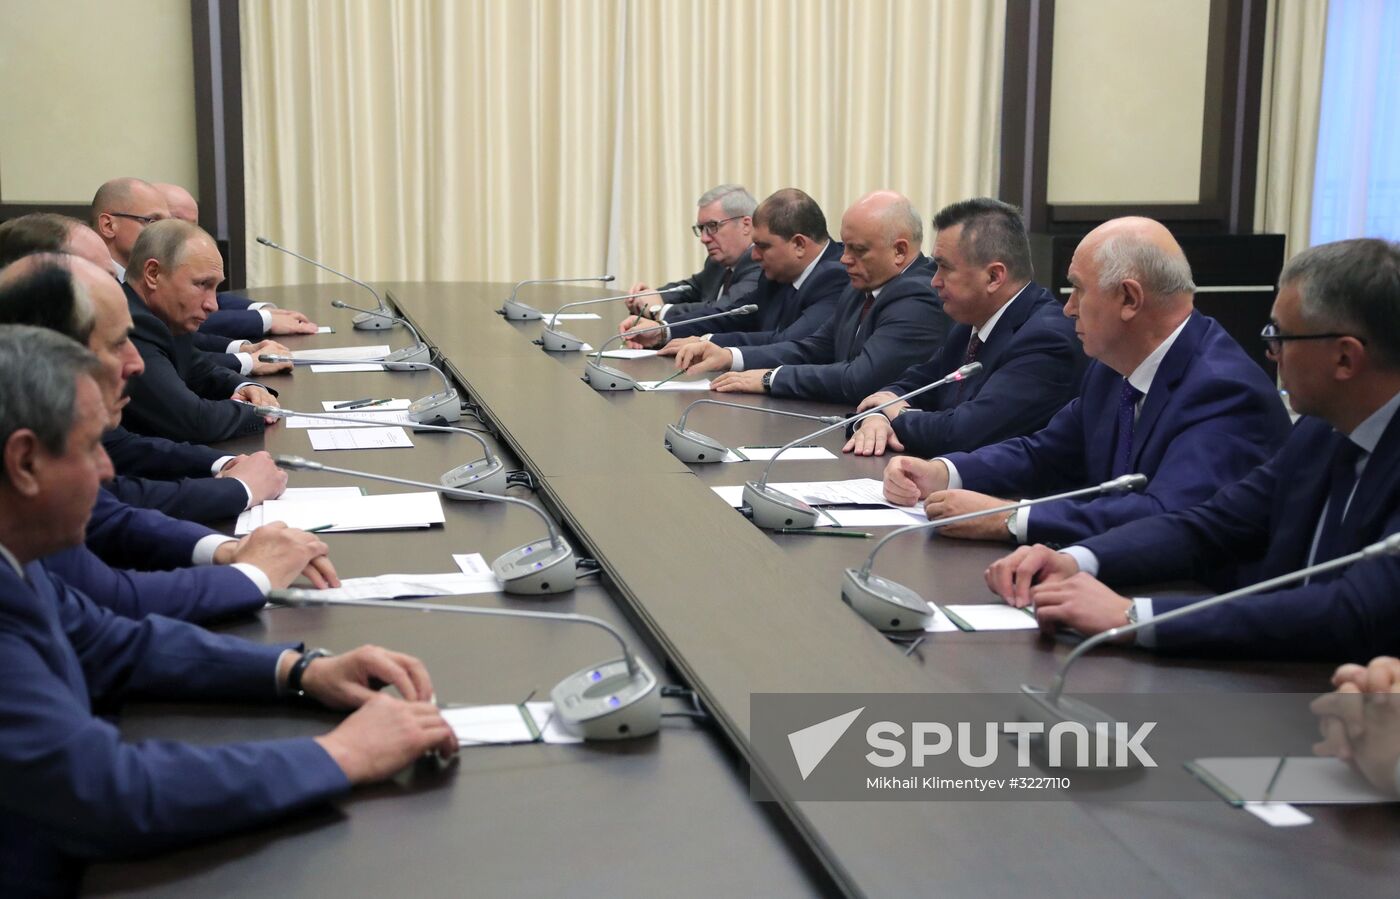 President Putin meets with retired governors